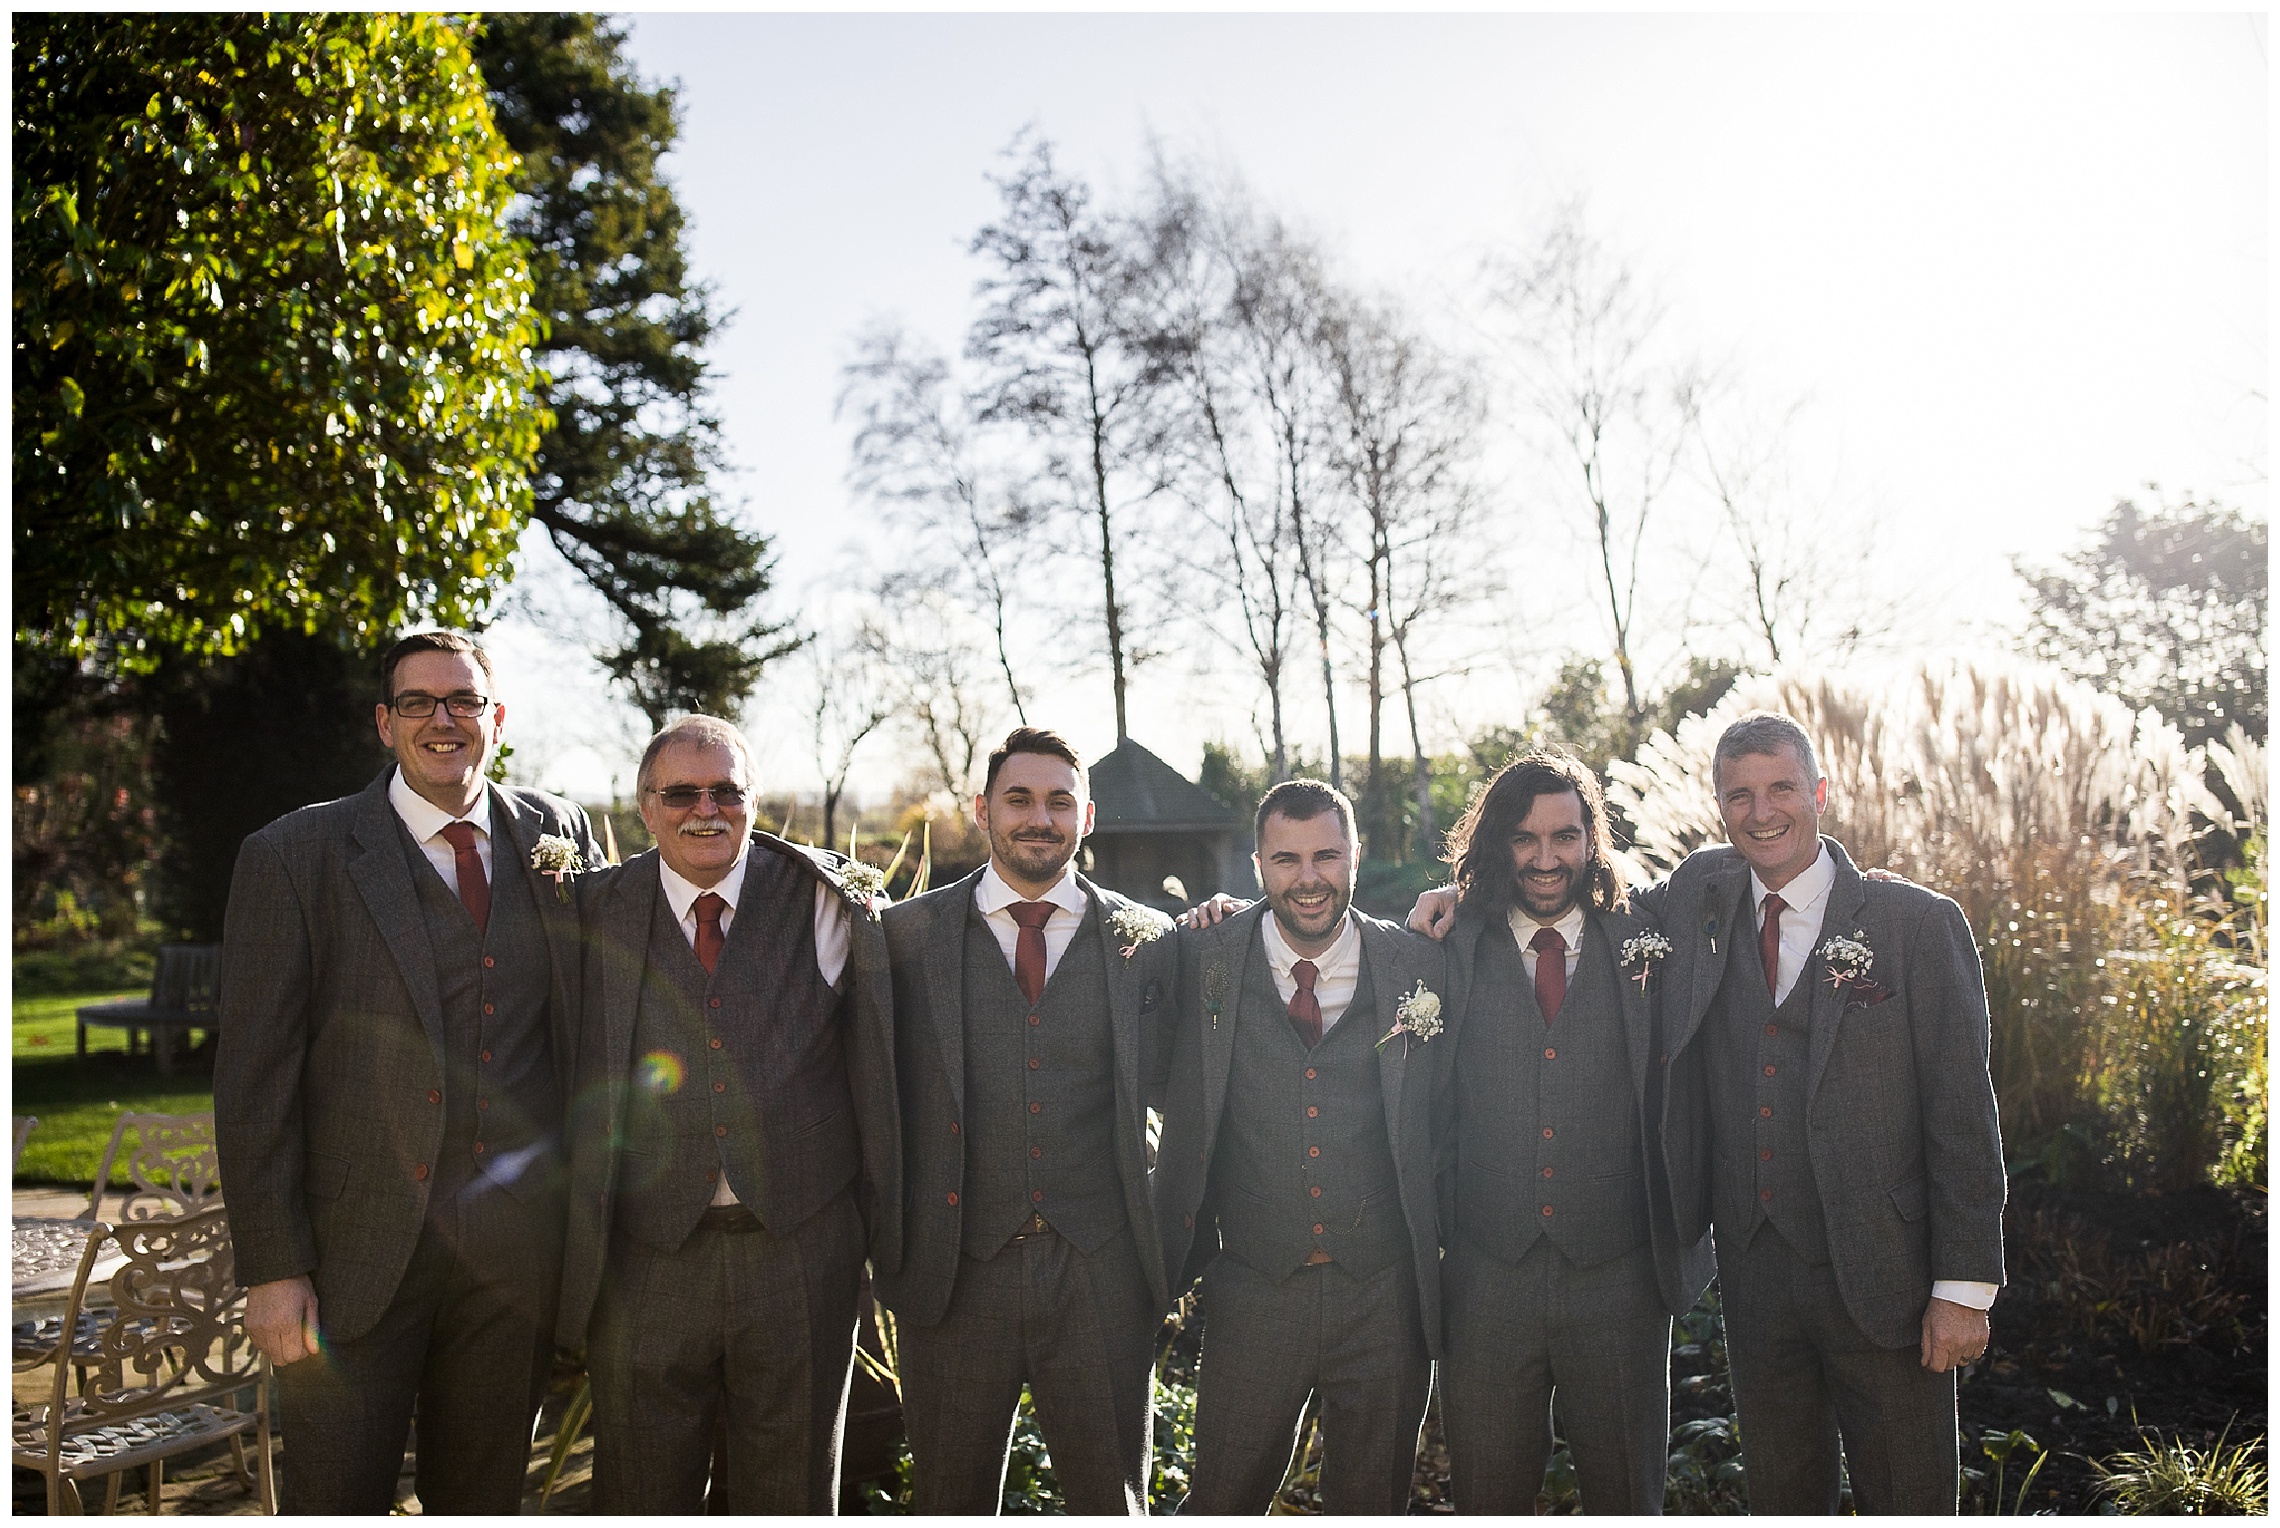 groomsmen in grey suits and red ties standing together outside